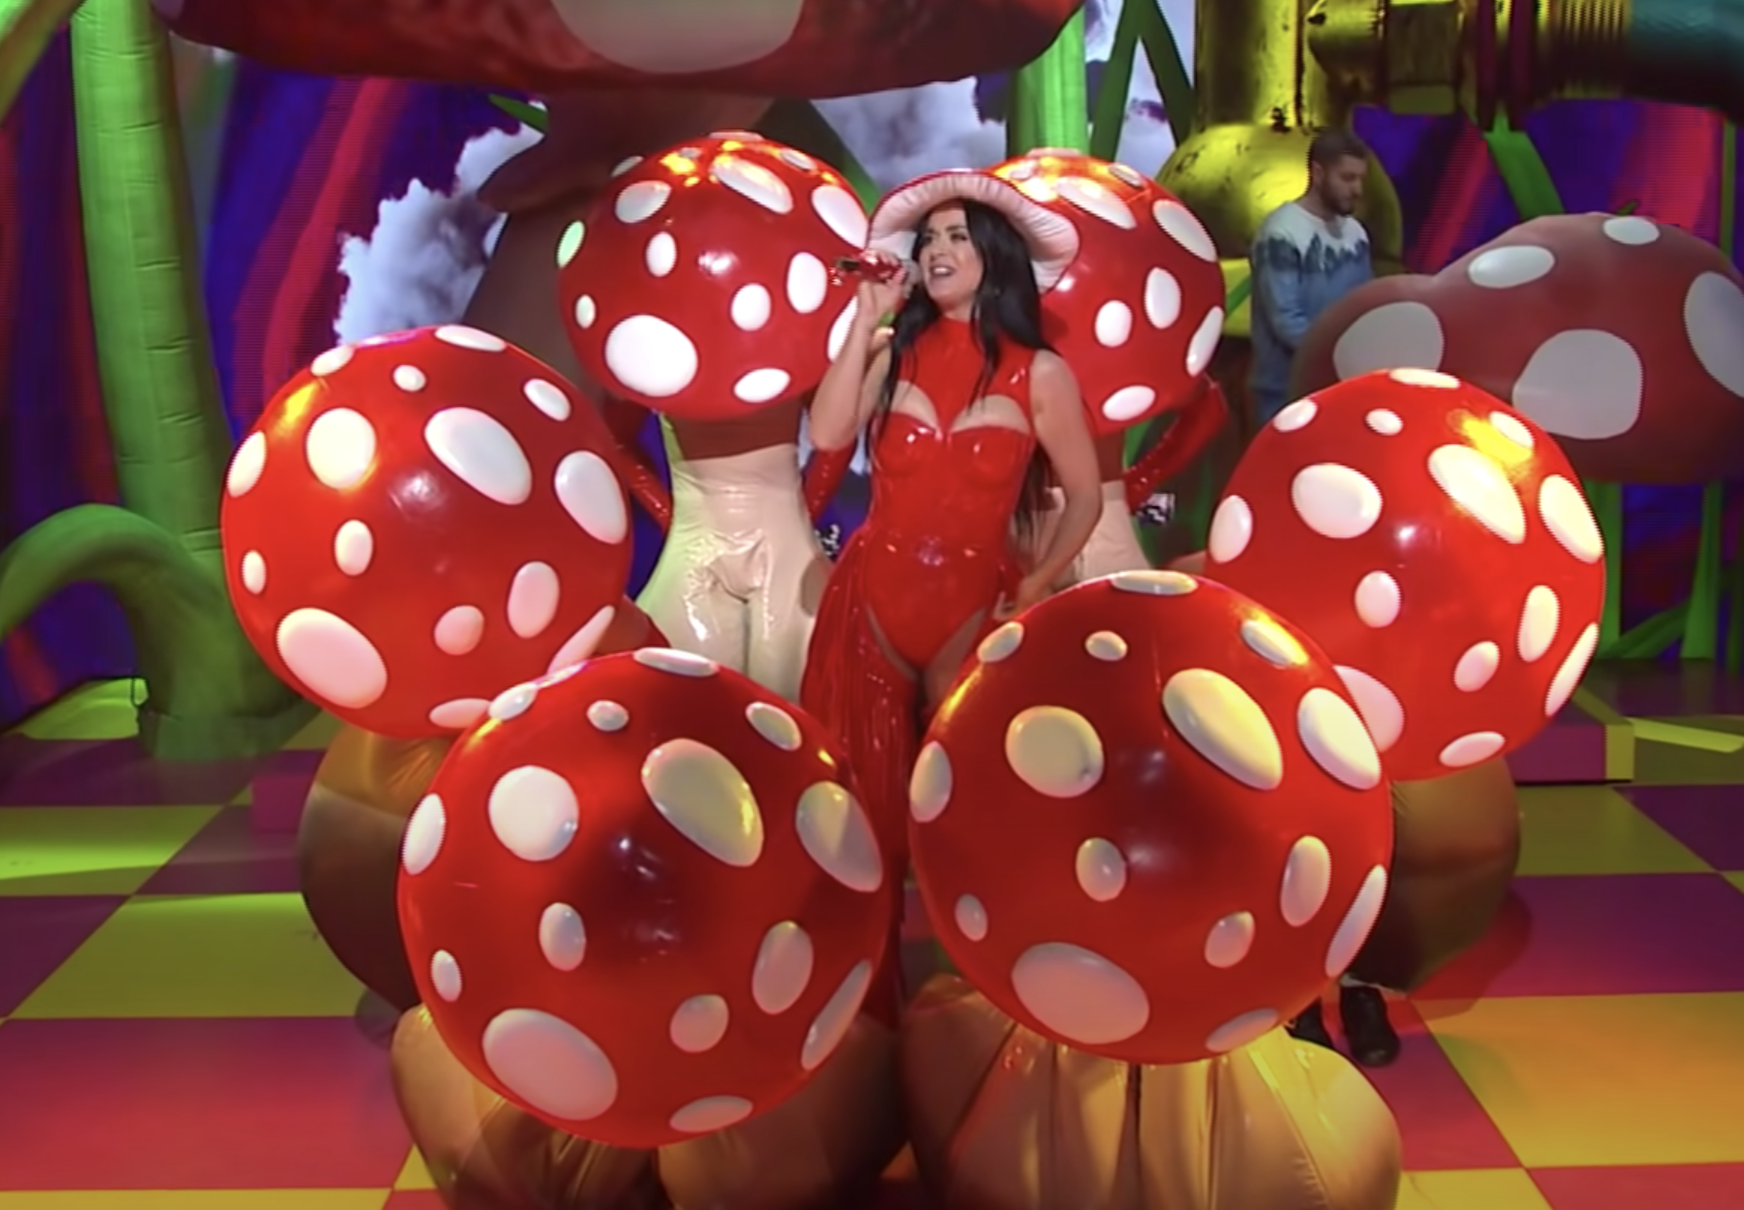 Katy Perry Takes the SNL Stage!